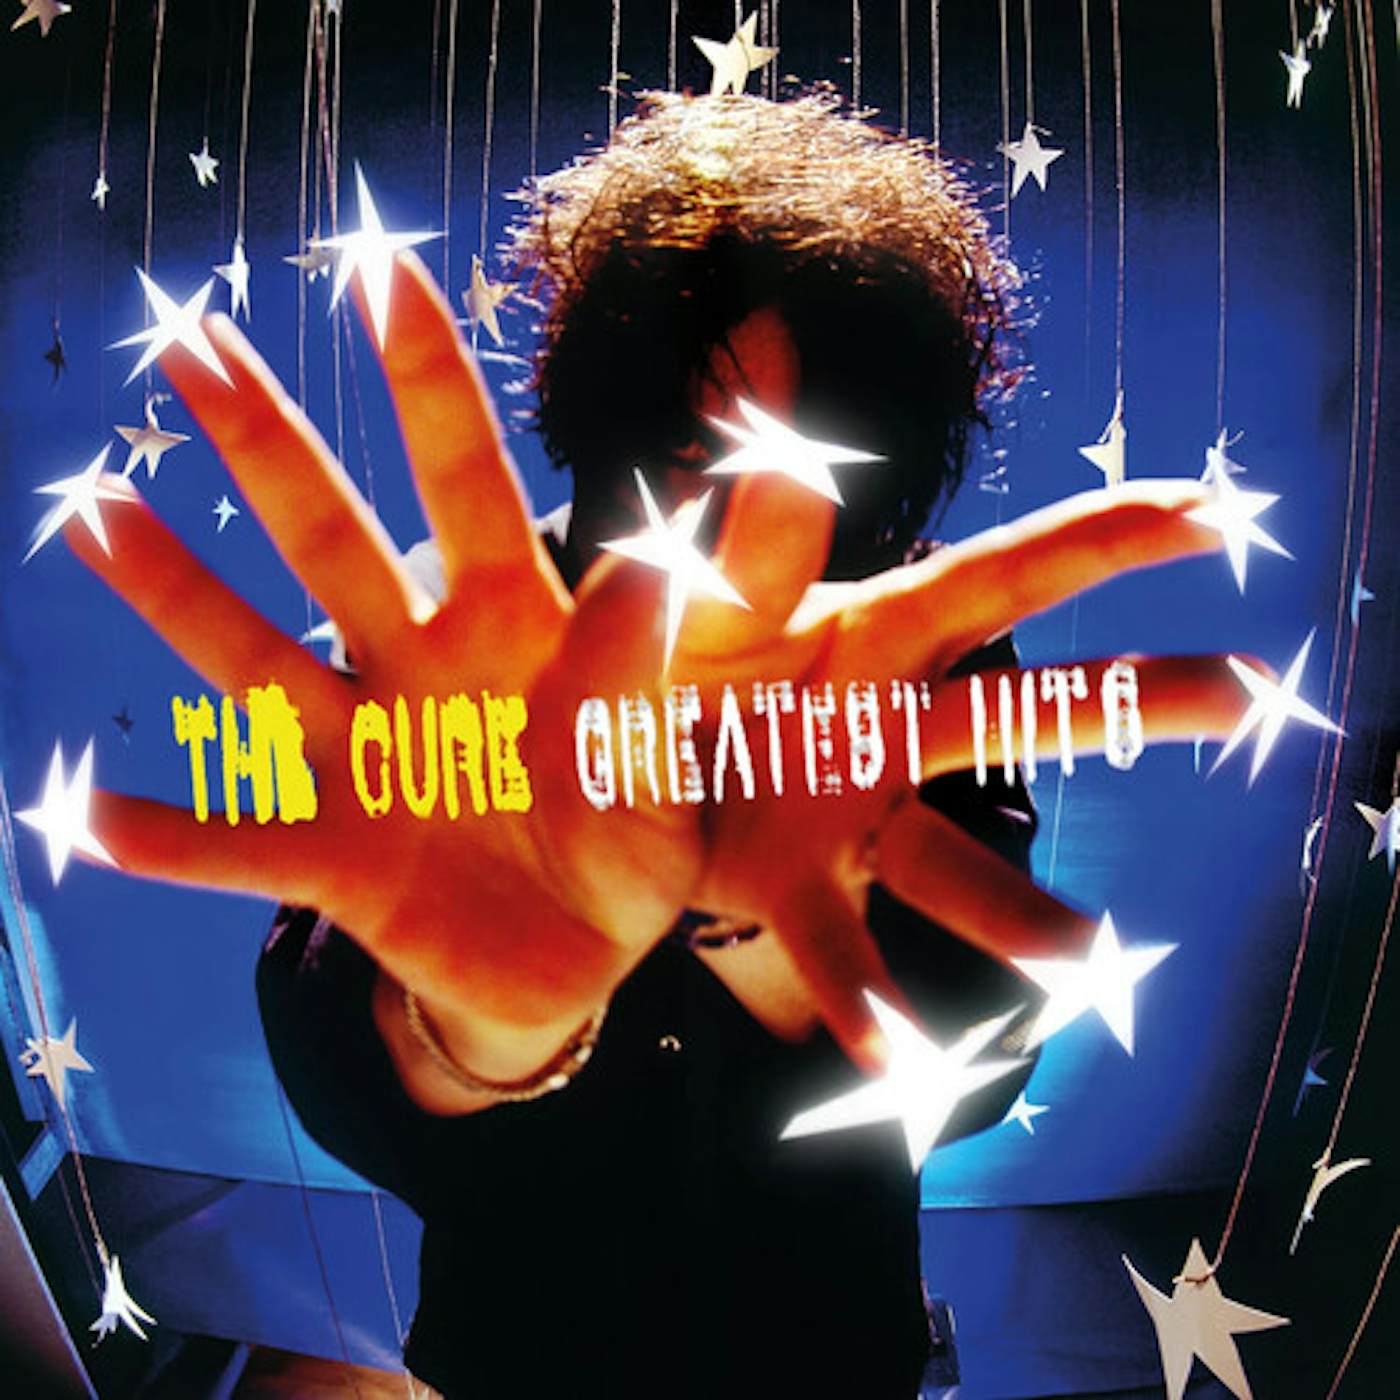 The Cure Greatest Hits Vinyl Record